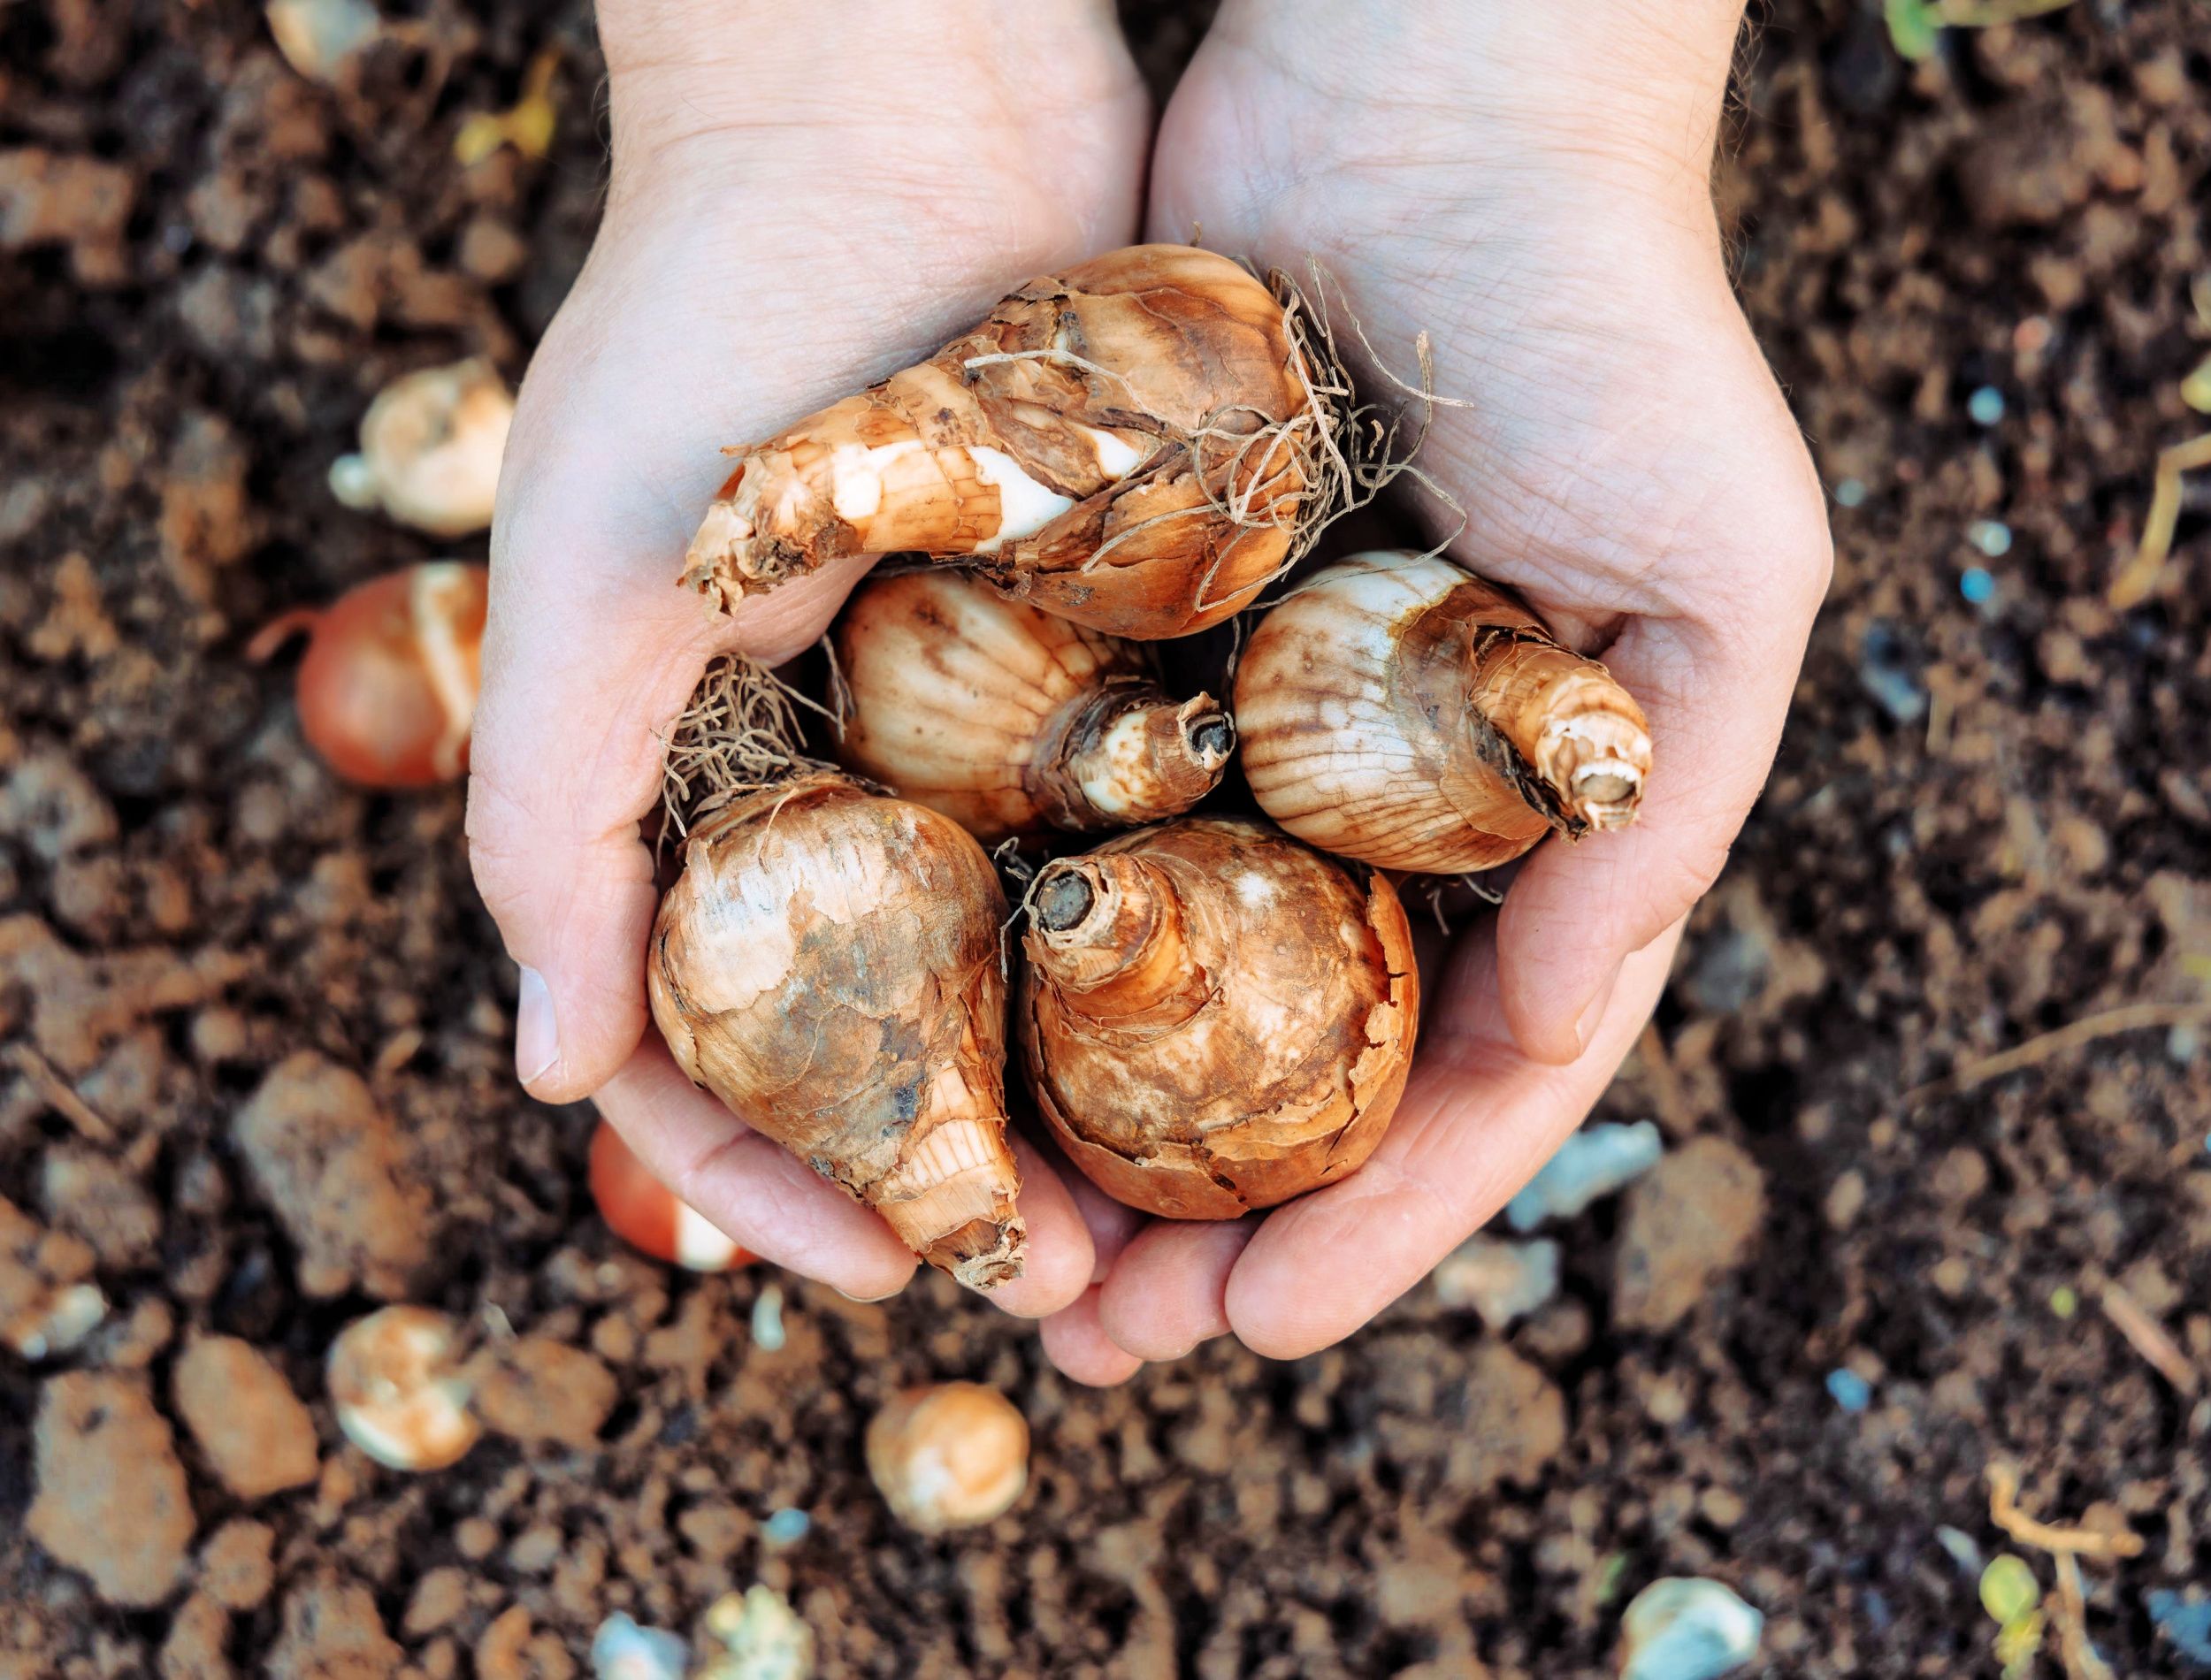 hands holding daffodil bulbs before planting in the ground